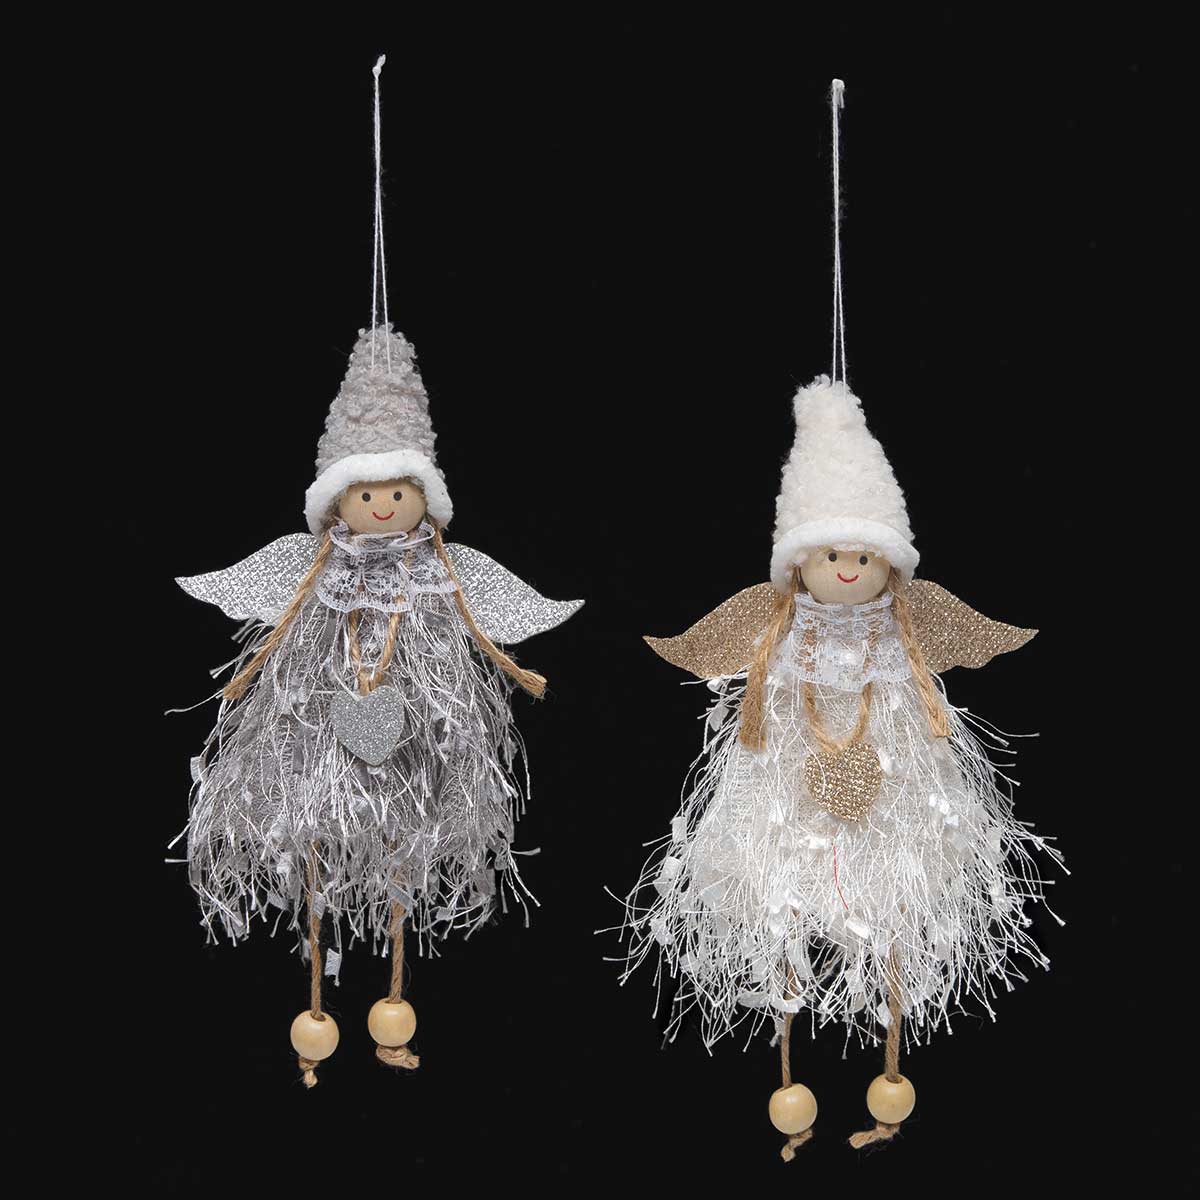 ORN ANGEL WITH ROPE LEGS 2 ASSORTED 4.25IN X 1.25IN X 8.5